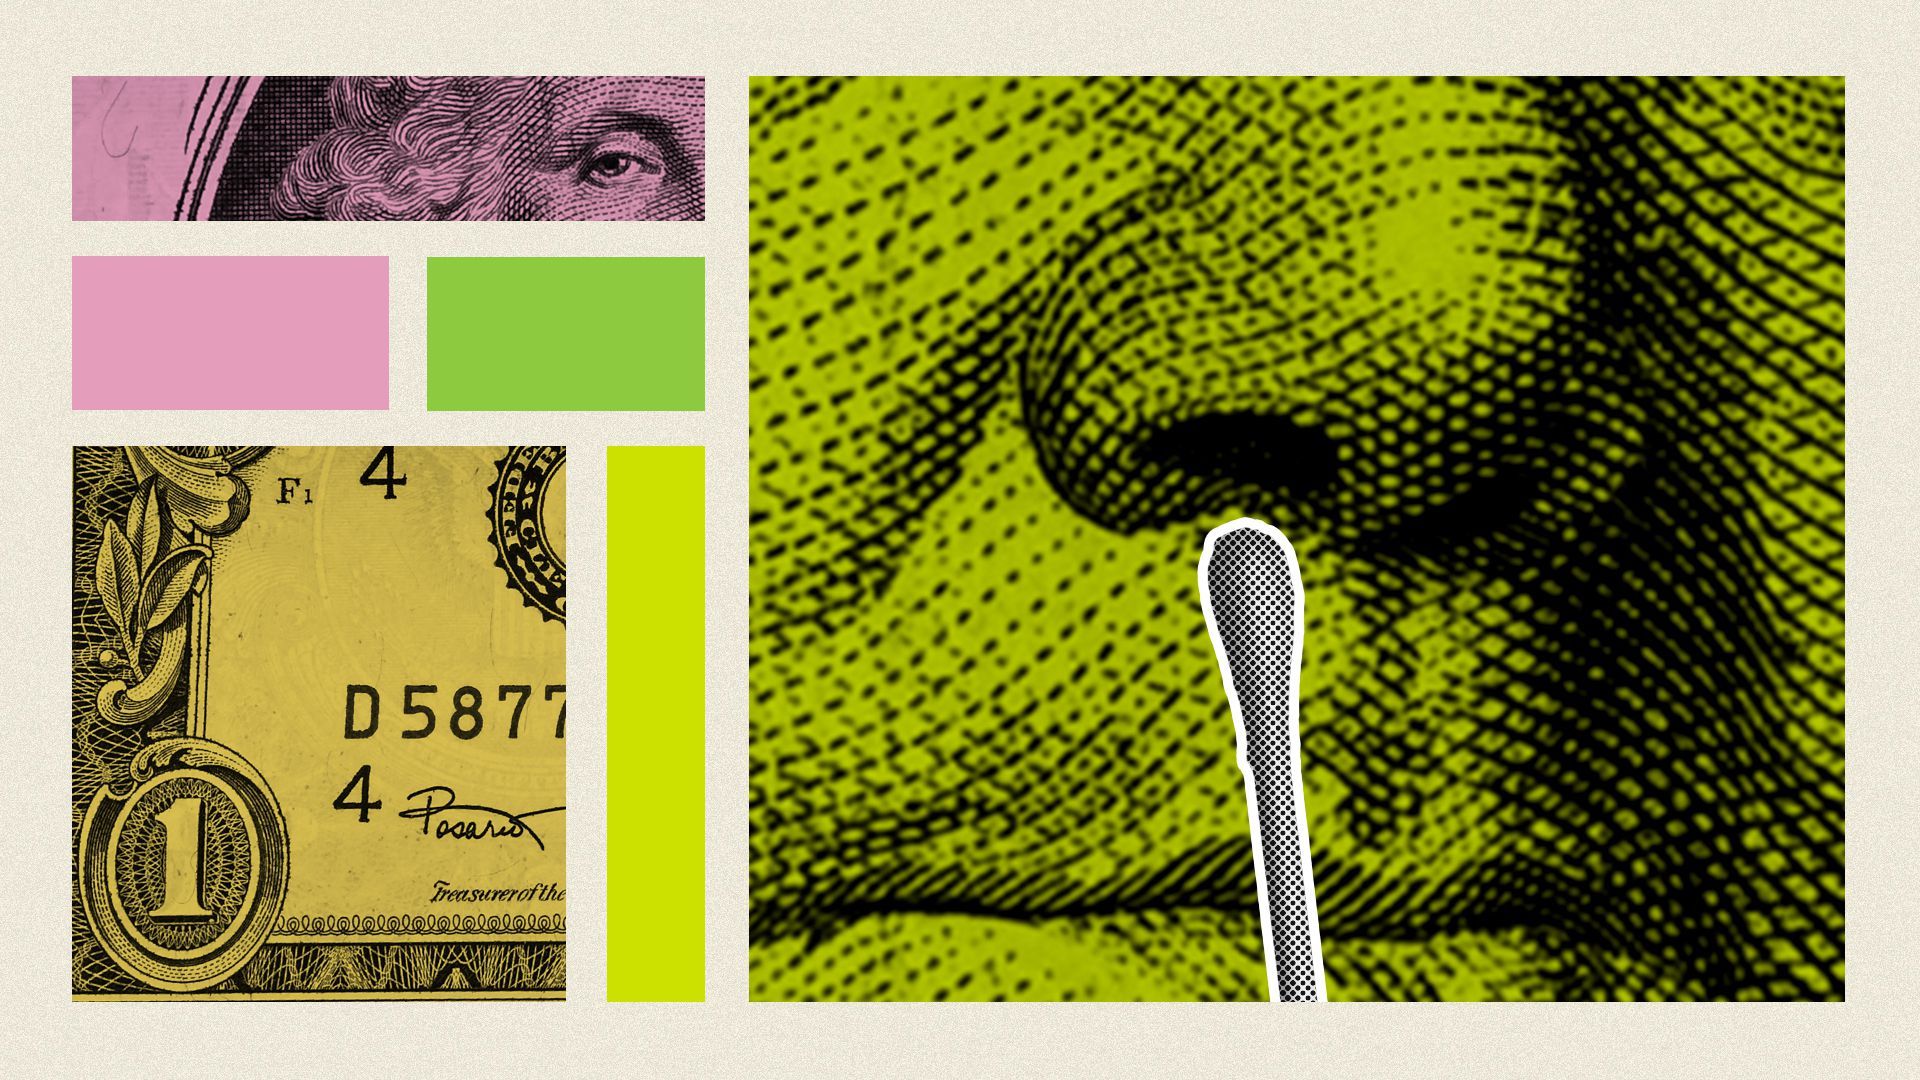 Illustrated collage of Ben Franklin with Q-tip near his nostril.